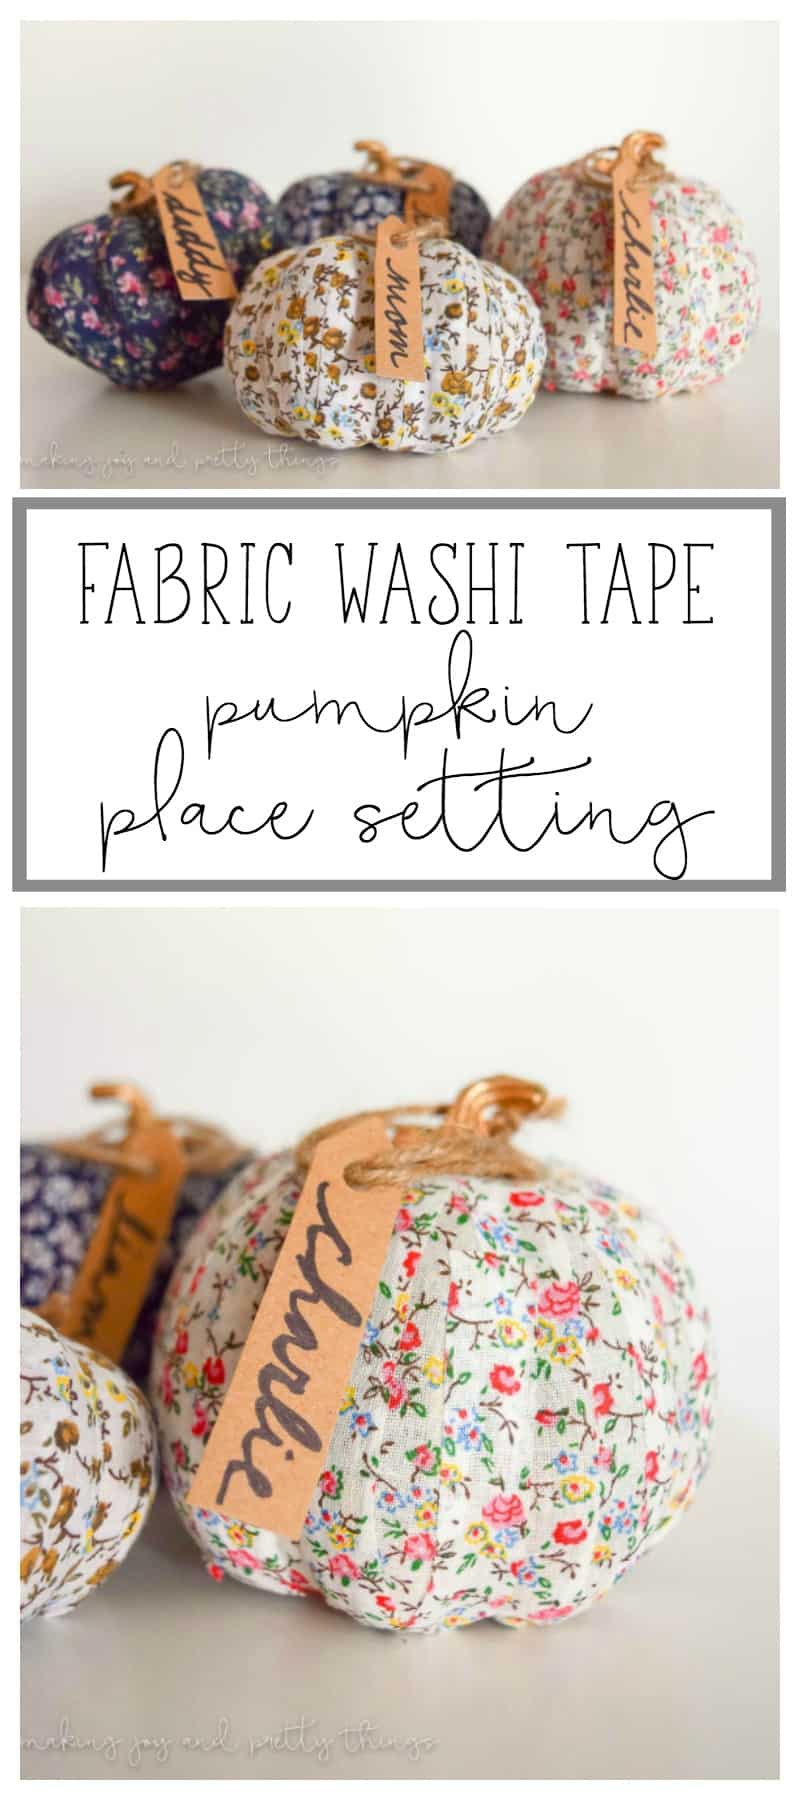 These fabric wash tape pumpkins are the perfect place setting for your fall-themed dinner party or Thanksgiving dinner.